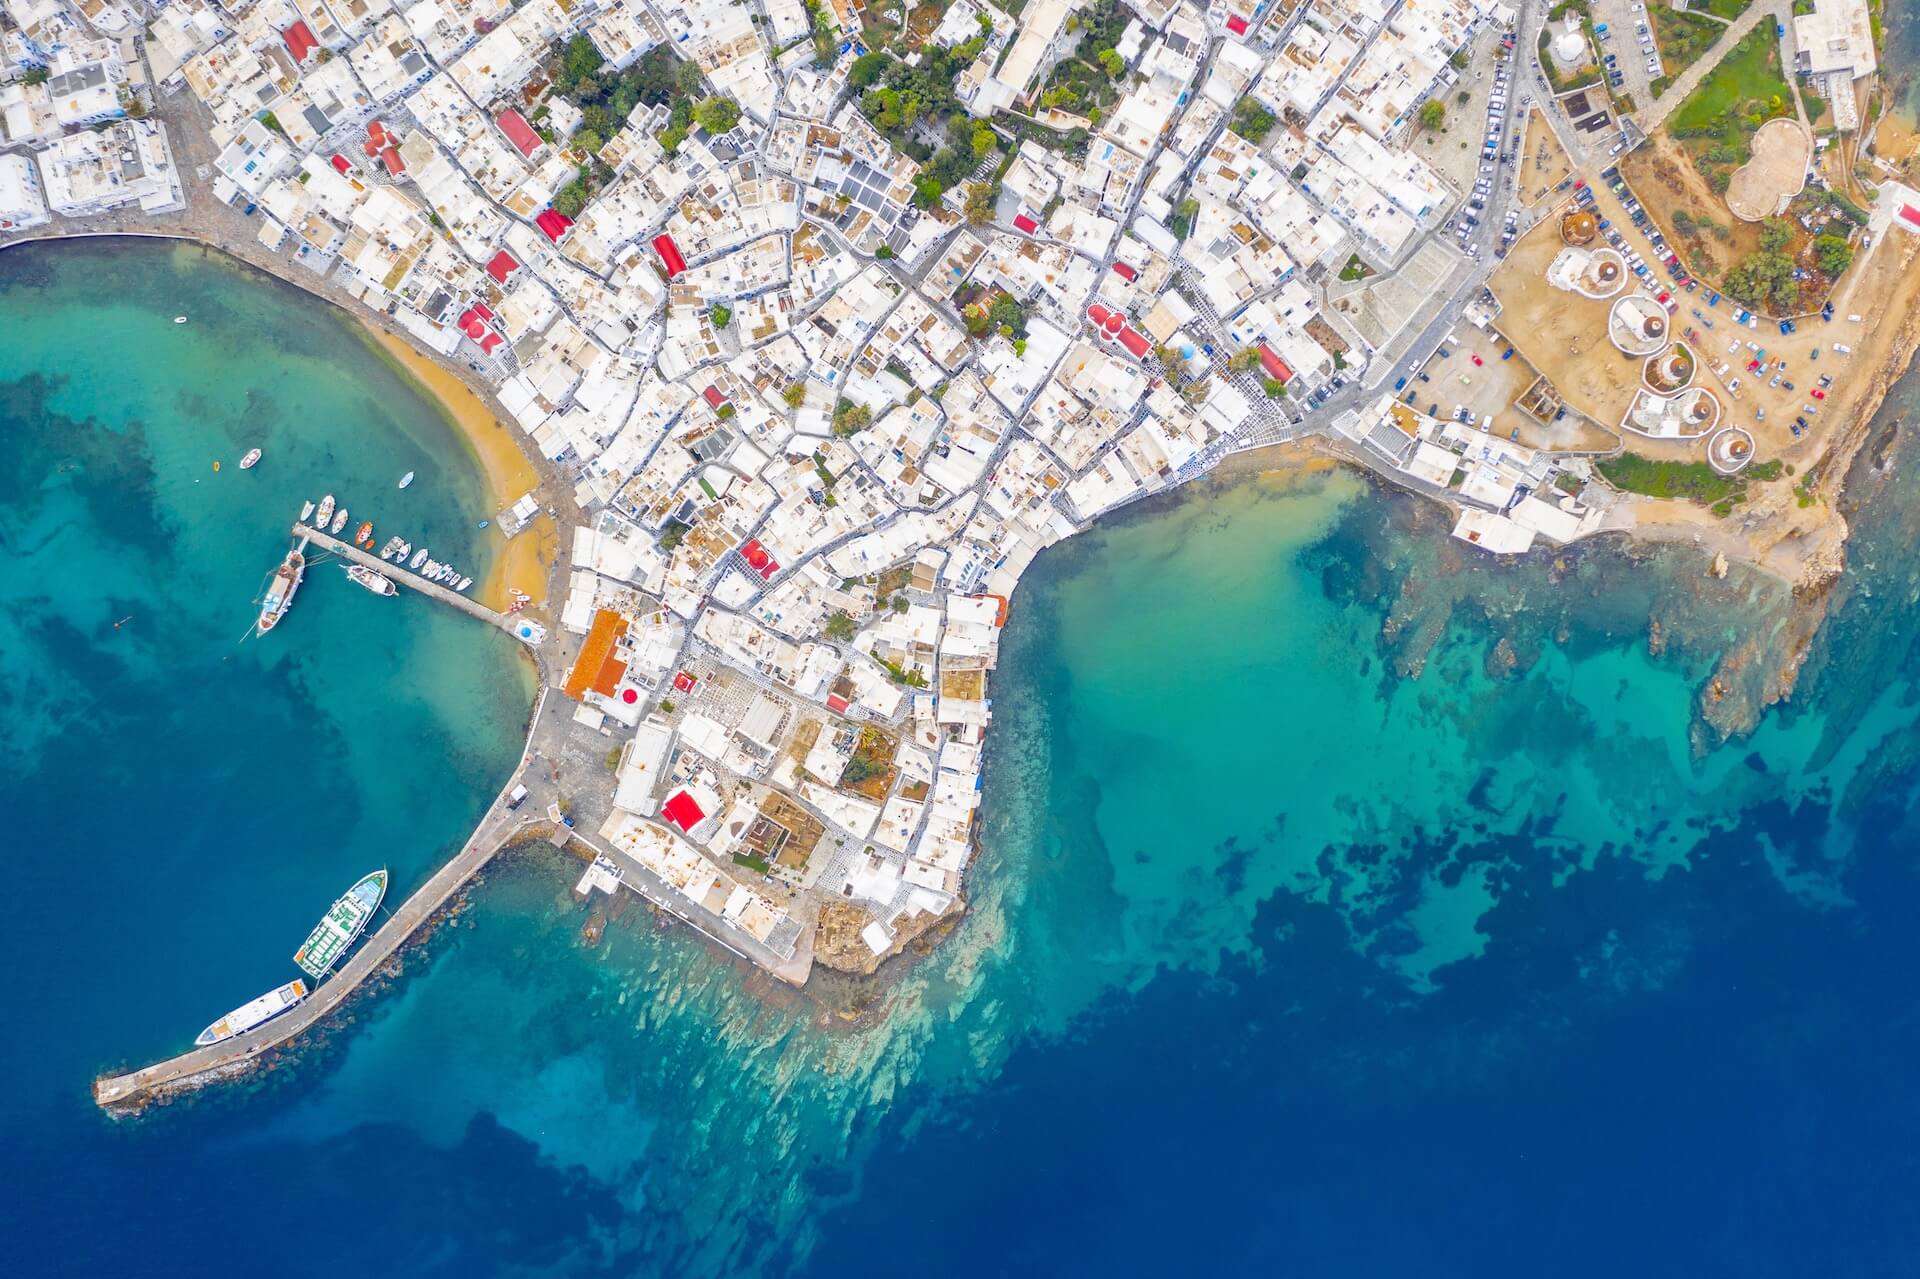 Old port in Mykonos town photographed from the air